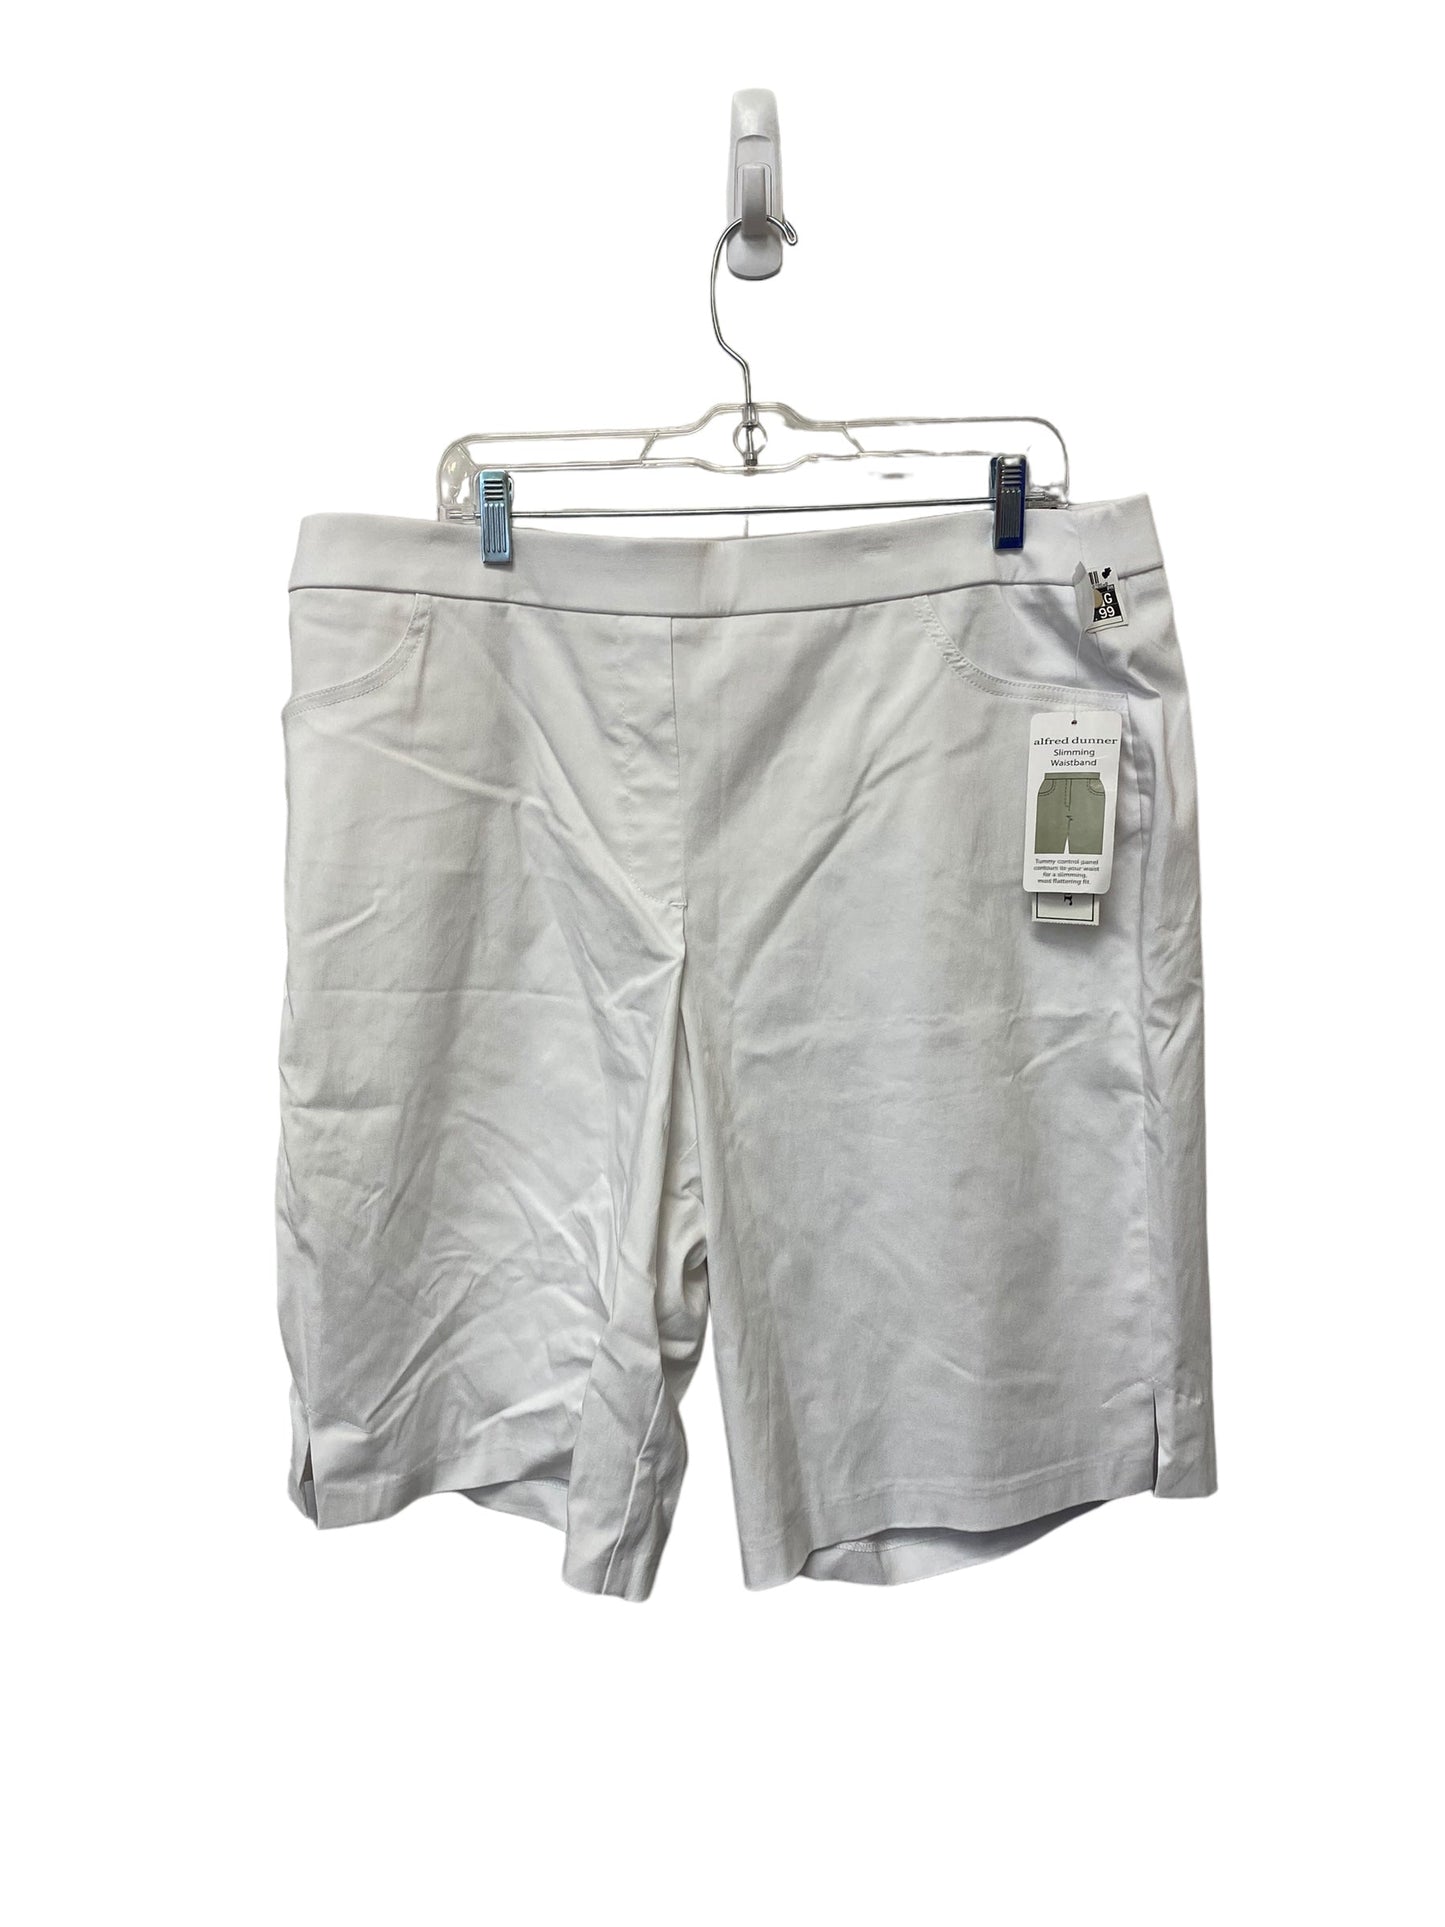 White Shorts Alfred Dunner, Size 16